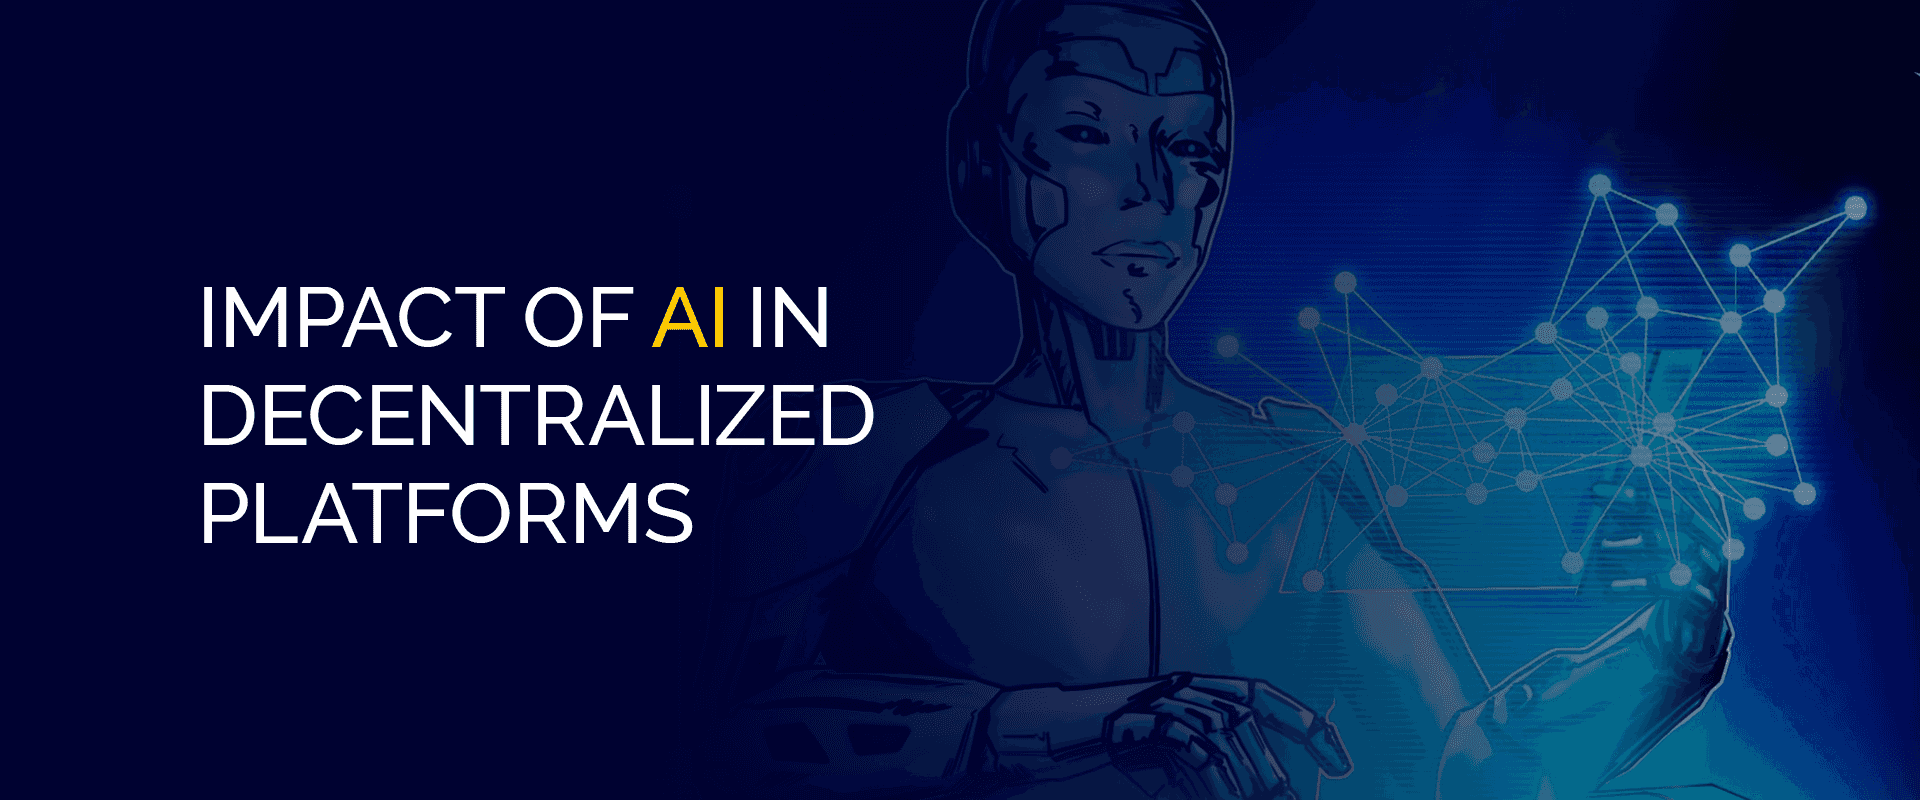 Impact of AI in Decentralized Platforms